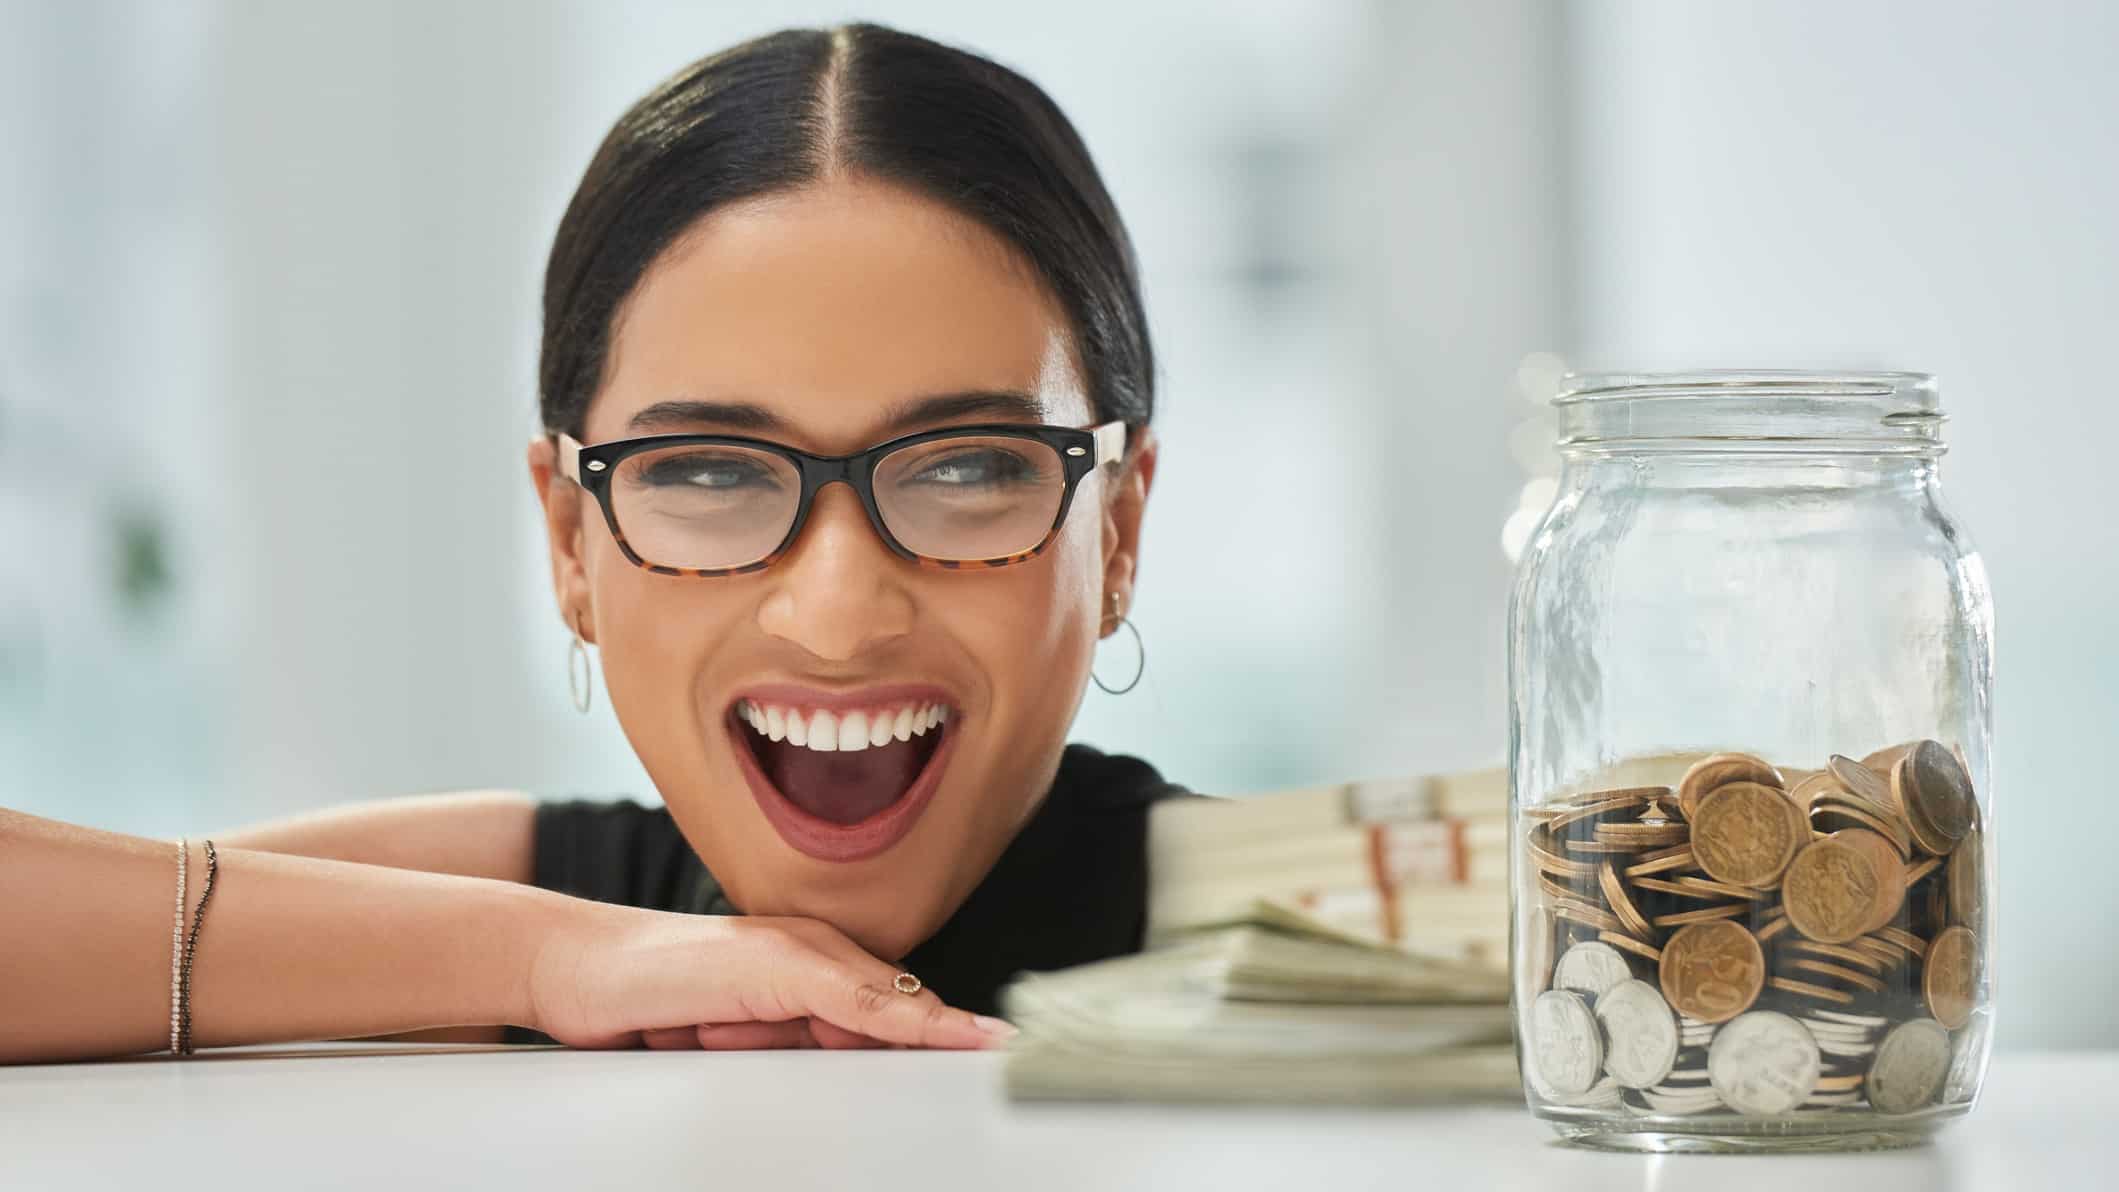 a woman with a huge happy smile on her face eyes a jar of coins next to her on a table.